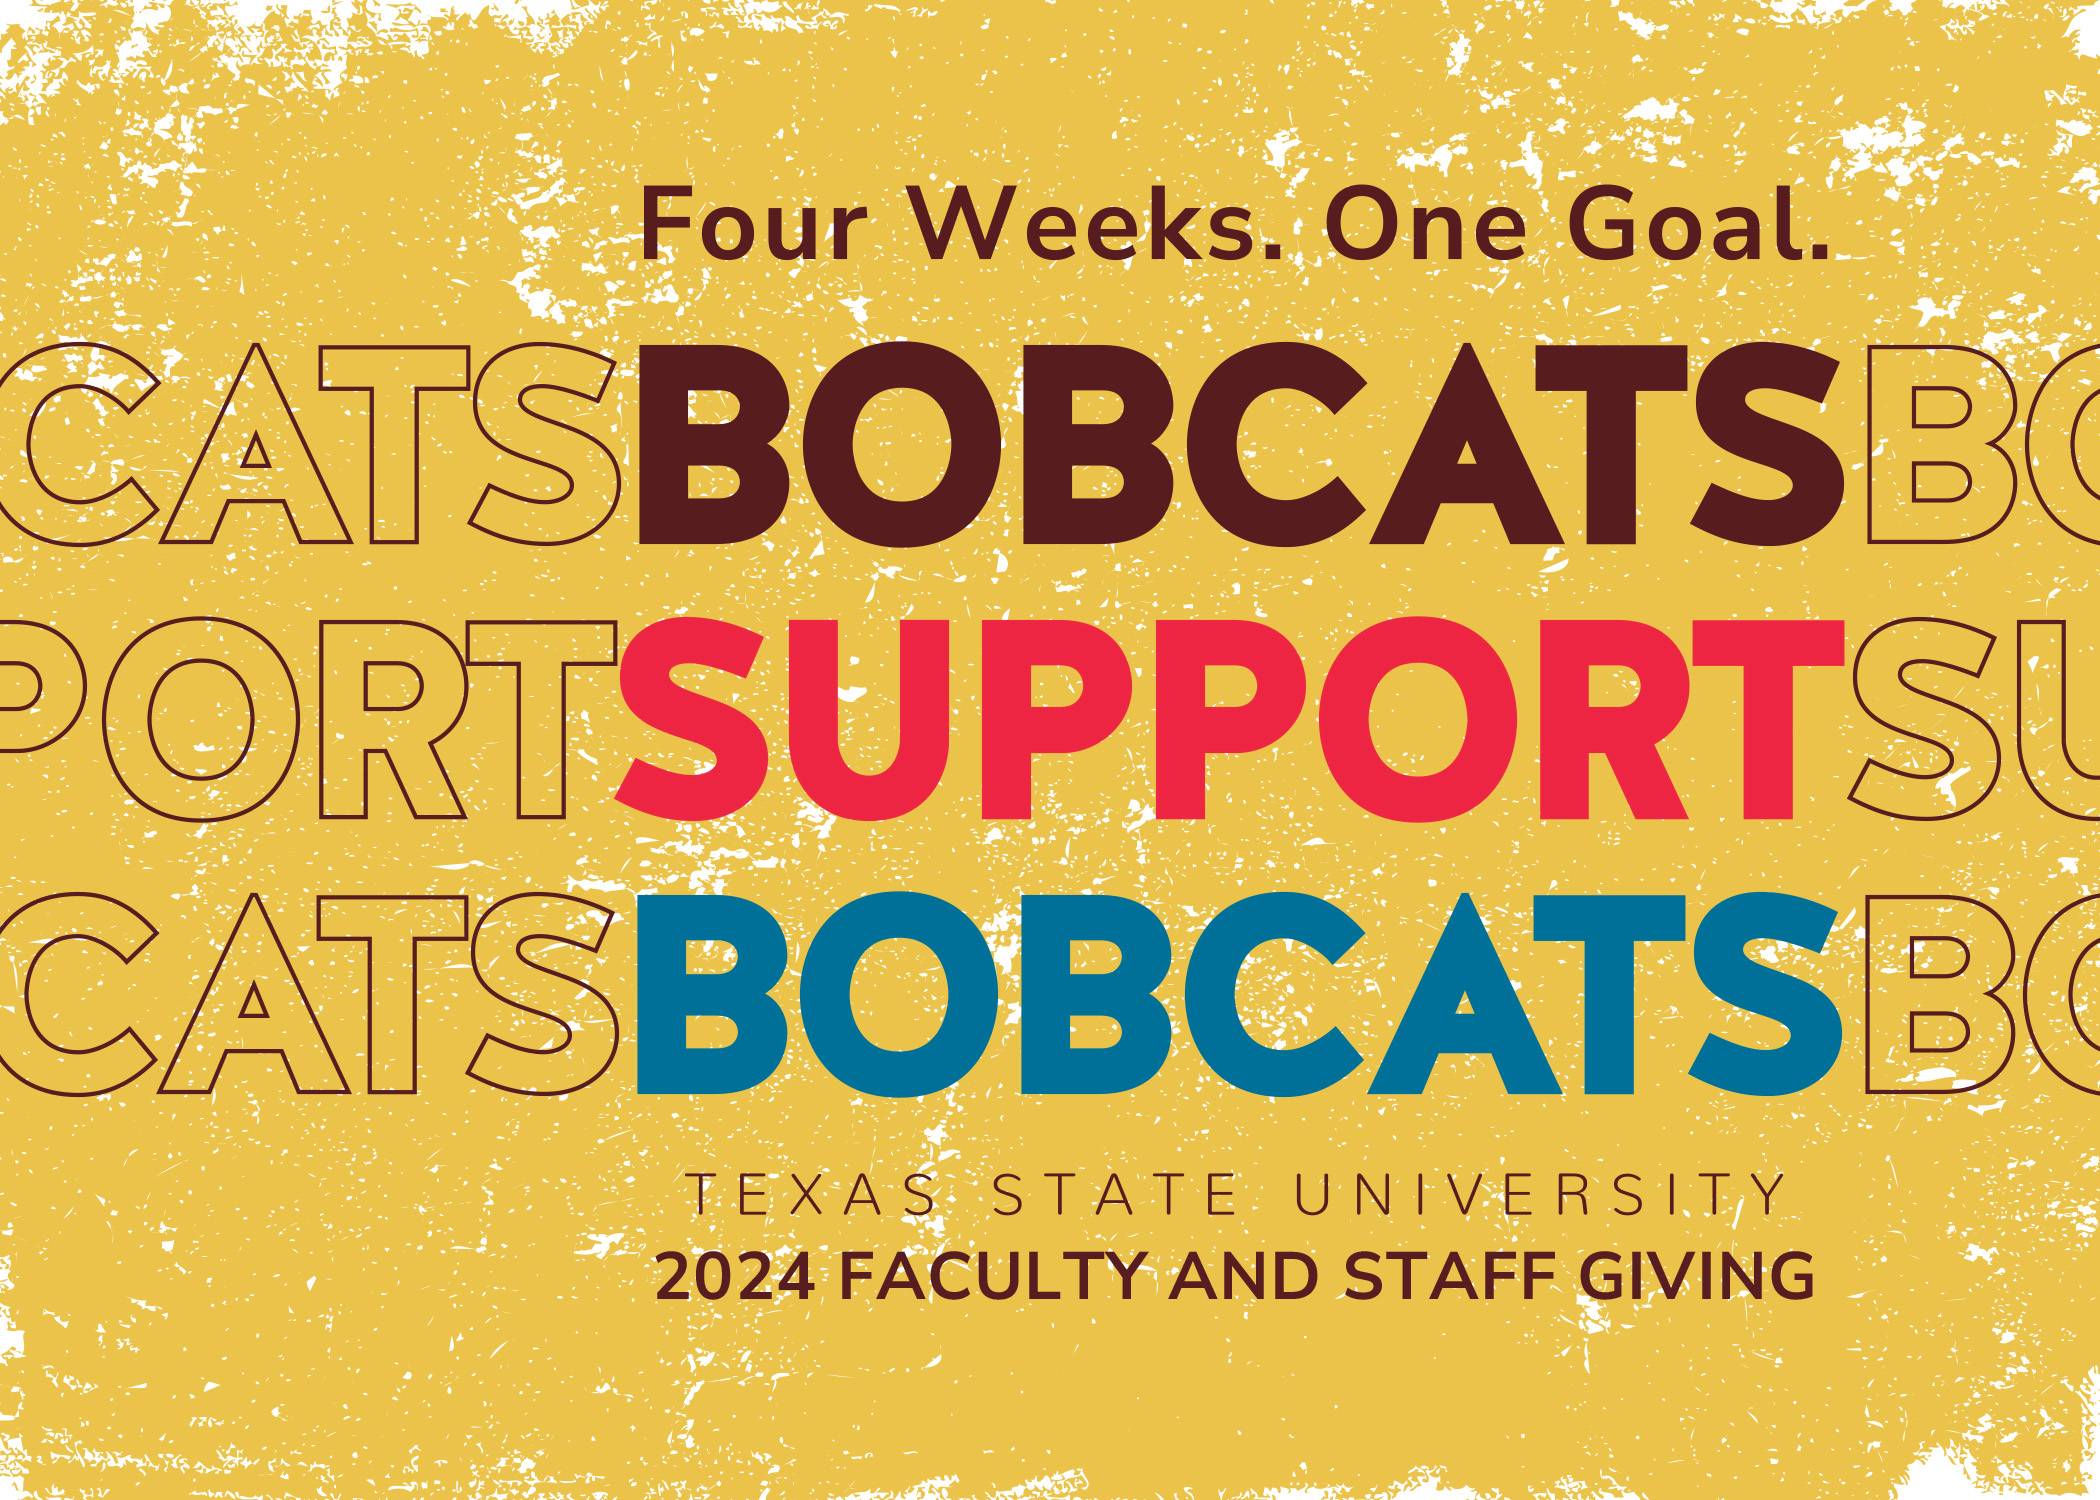 Gold color postcard with text reading "four weeks, one goal, bobcats support bobcats, 2024 faculty and staff giving"